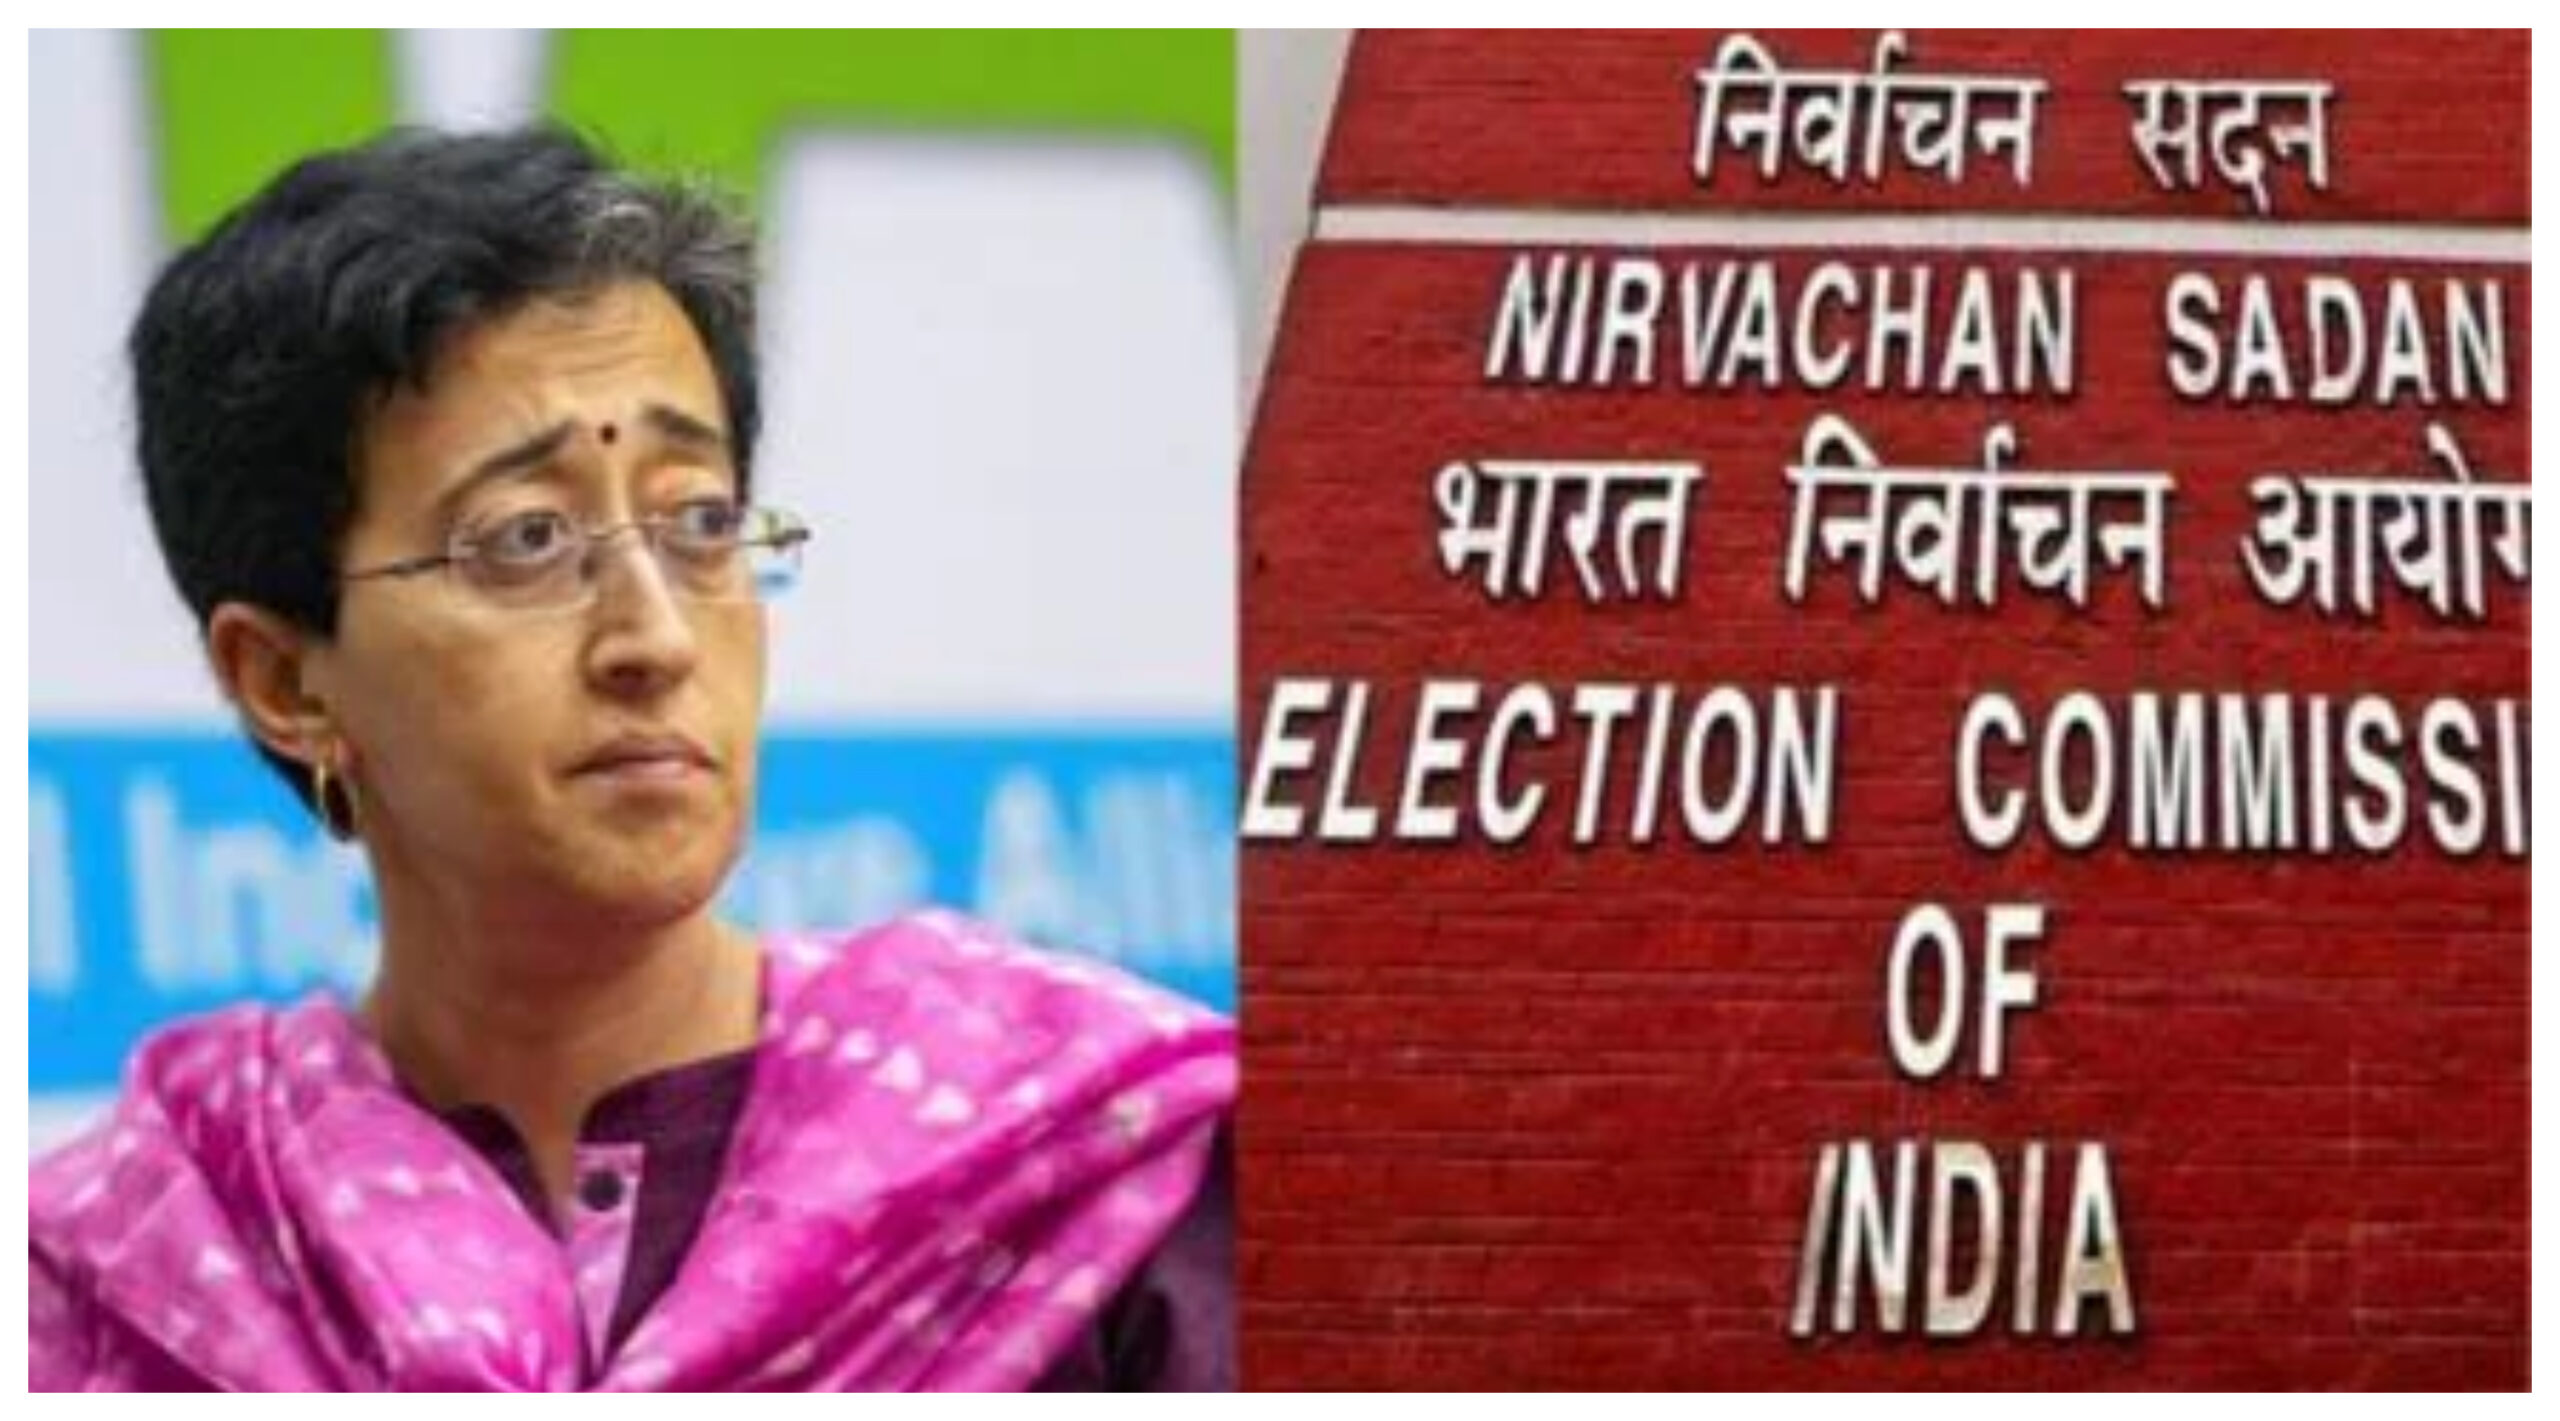 Delhi: Election Commission sent show cause notice to AAP leader Atishi, totaltv news in hindi, Political news in hindi